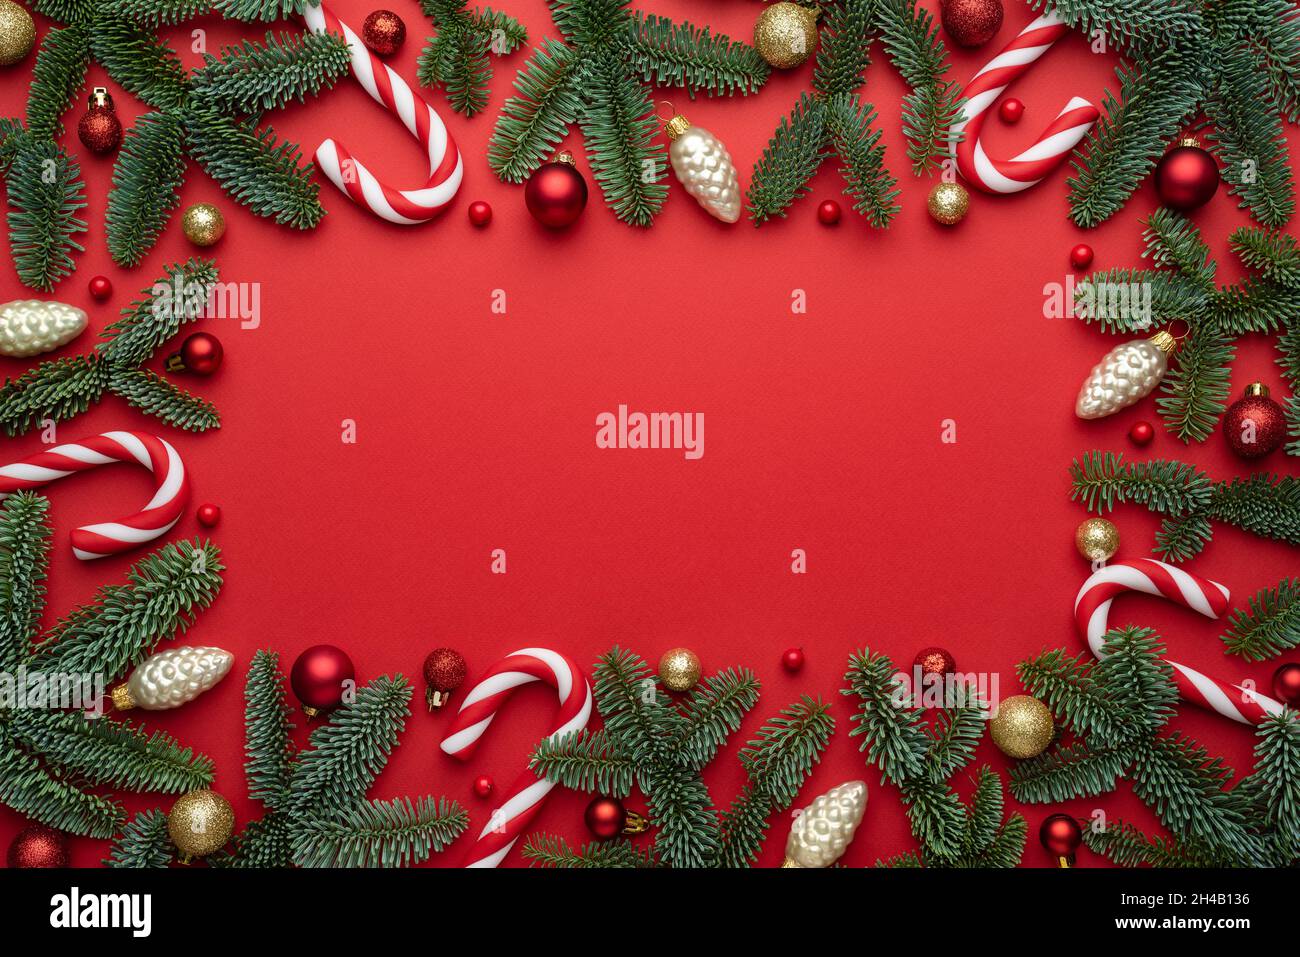 Red Christmas background with decorative frame made of fir branches and tree decorations. Flat lay, top view and copy space for text Stock Photo